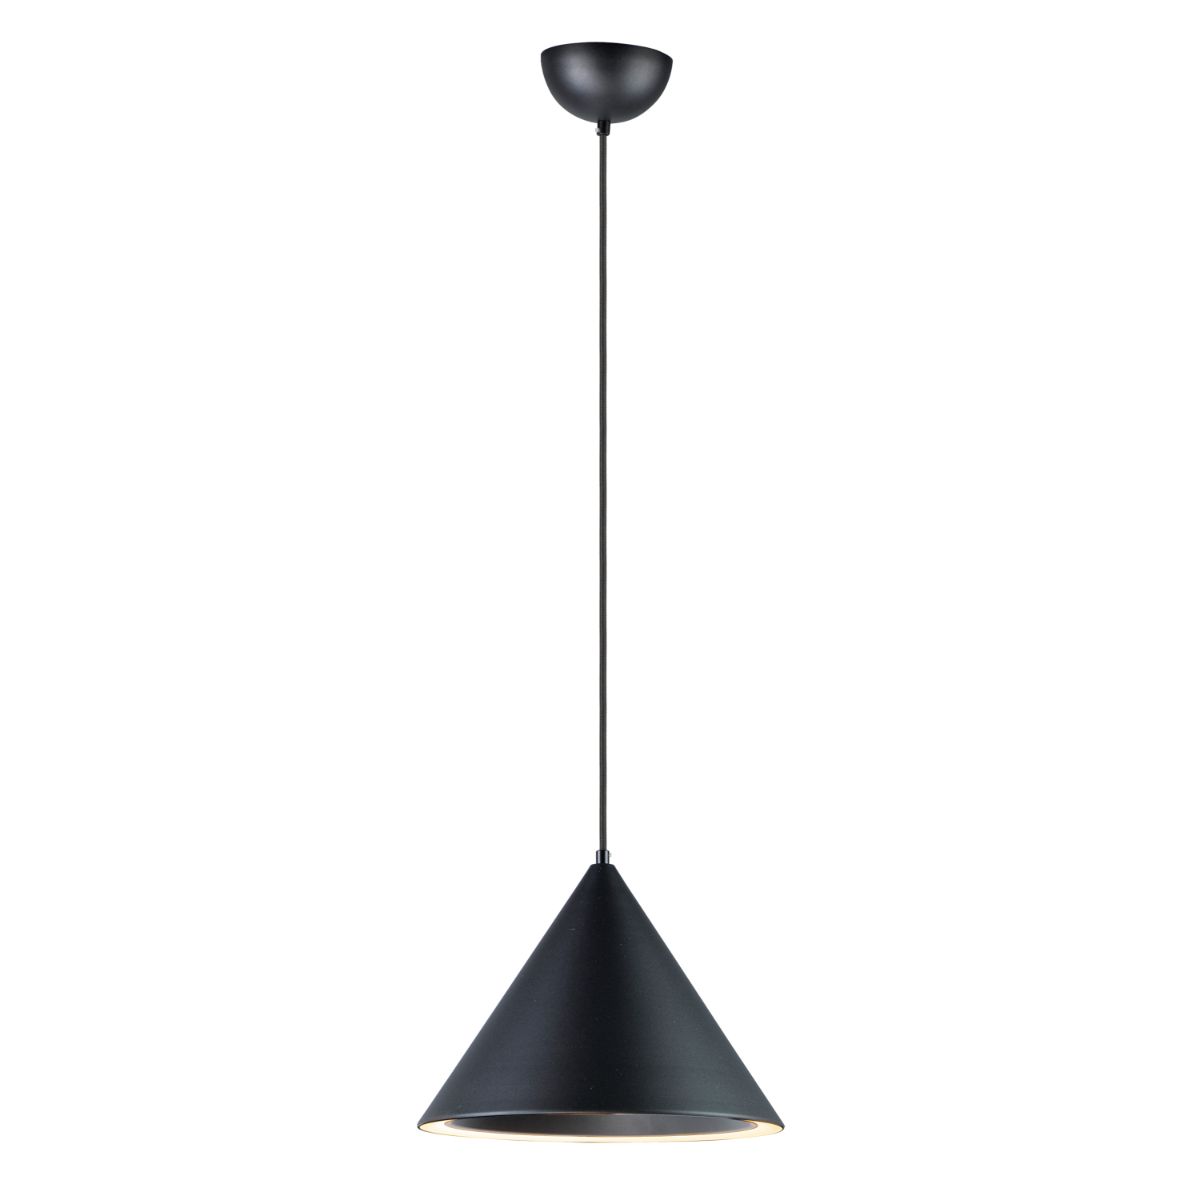 Abyss 13 in. LED Pendant Light